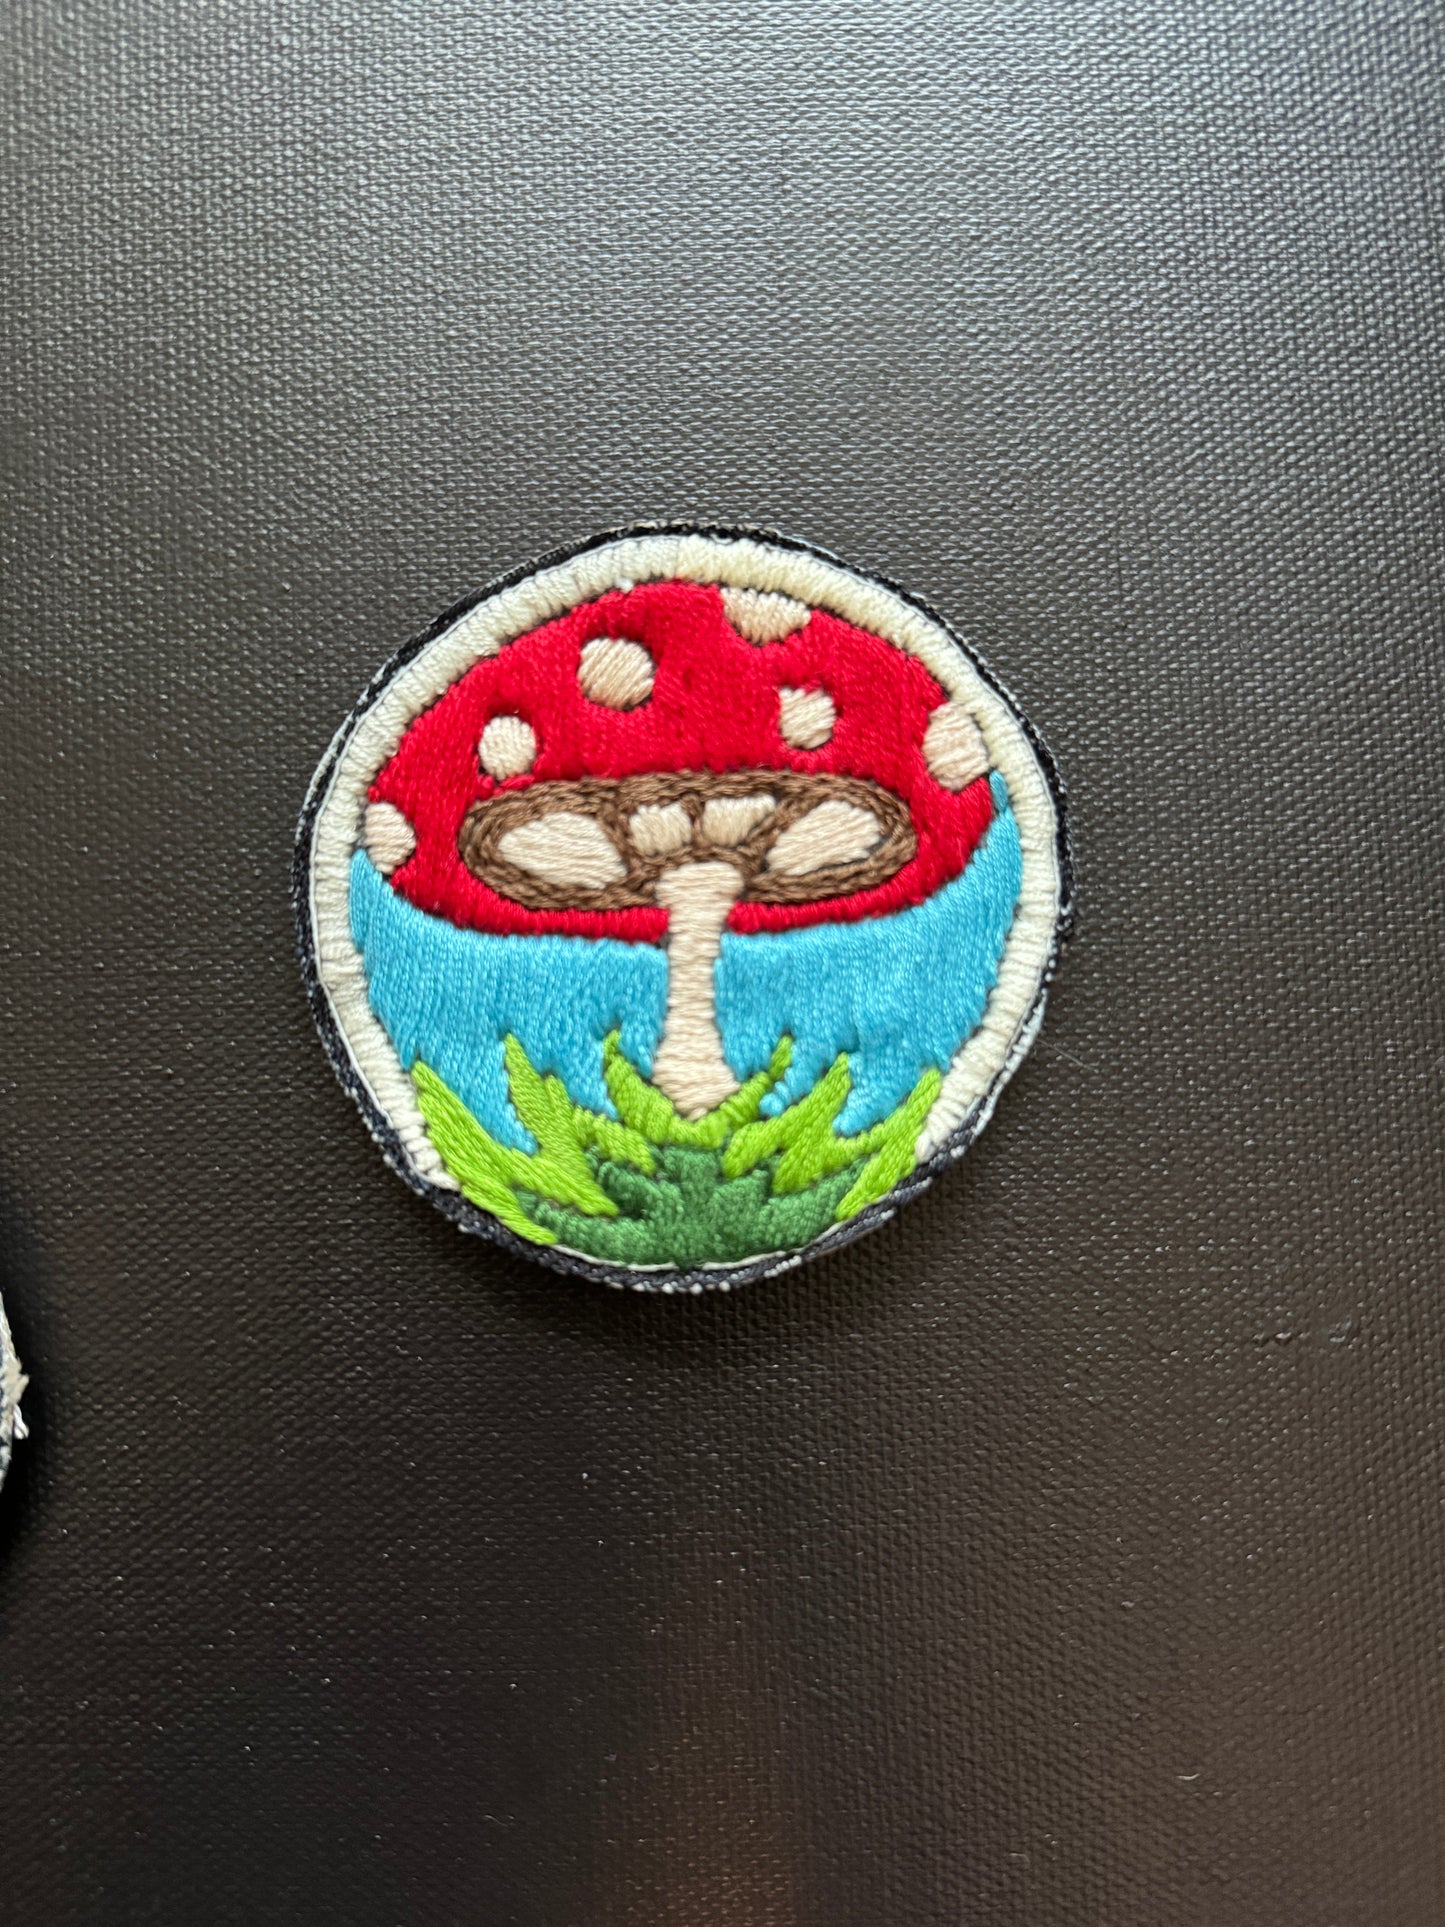 Shroom embroidery patch